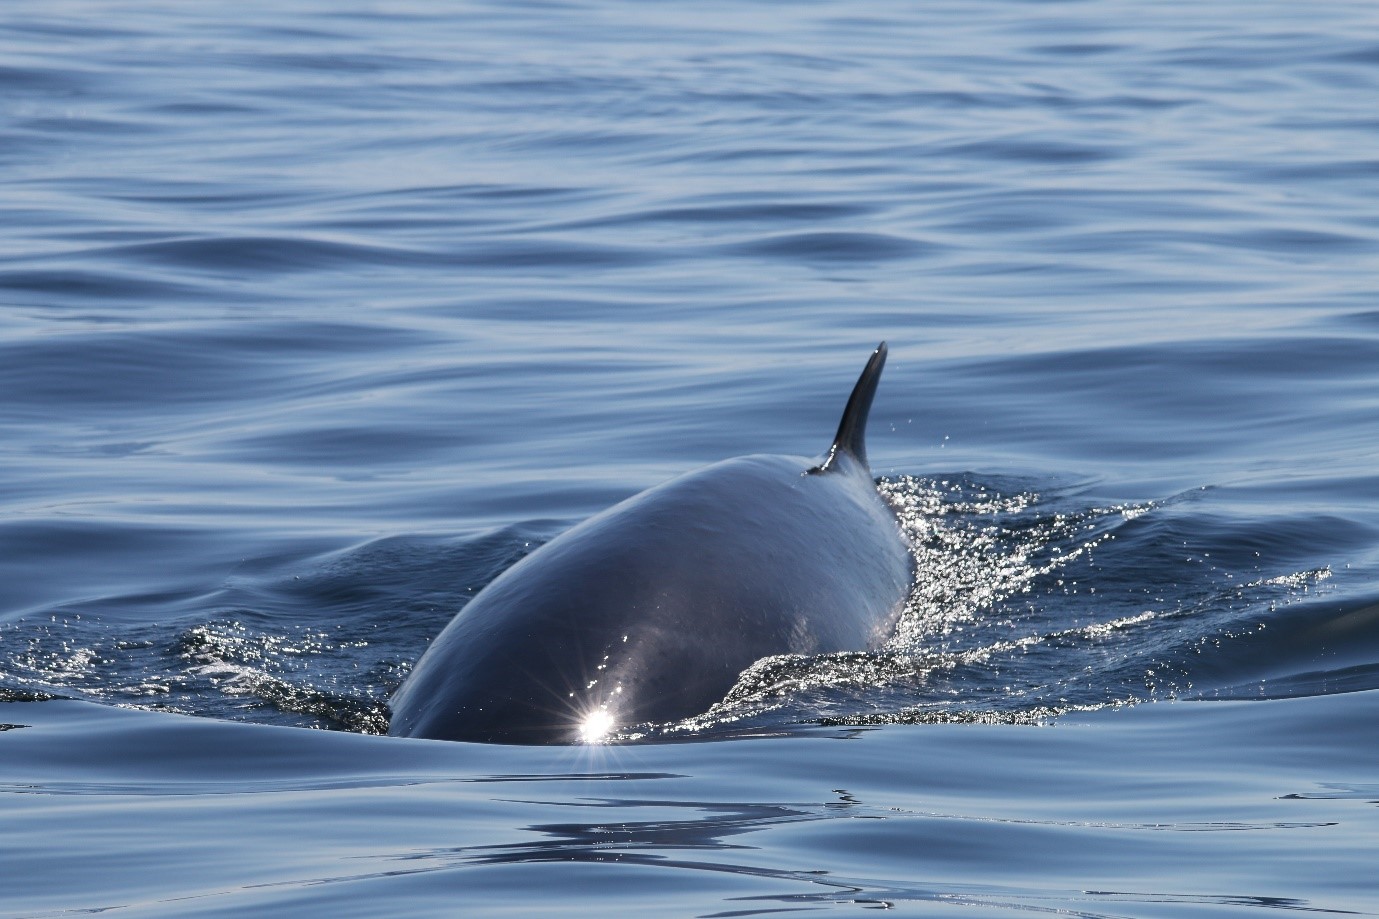 10 minke whales were recorded during the Expedition Survey